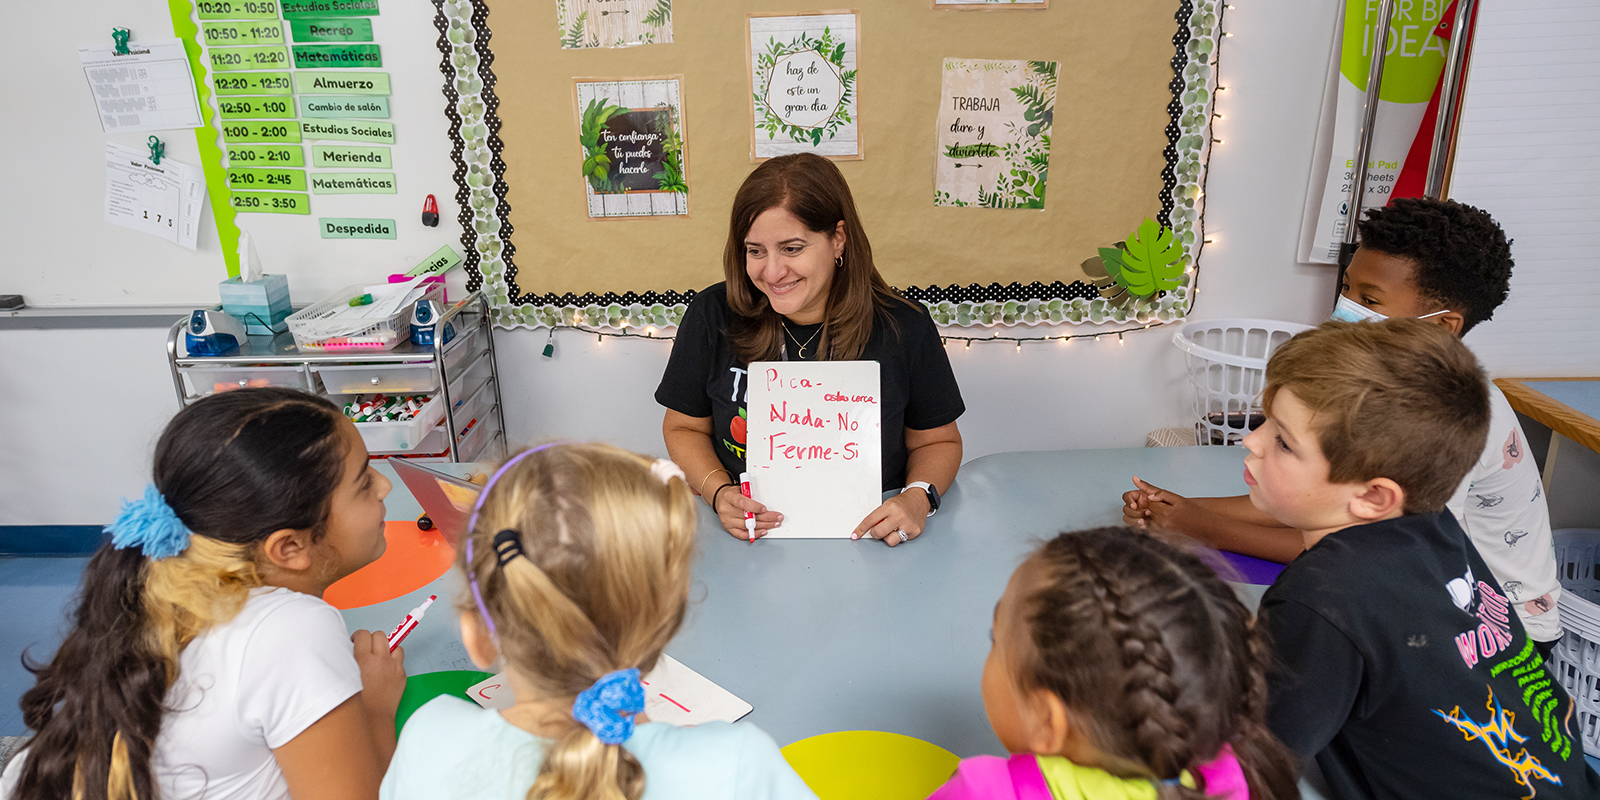 Lesliean Luna, a Spanish immersion teacher at Laurel Ridge Elementary, leads a small-group lesson with her third-grade students.